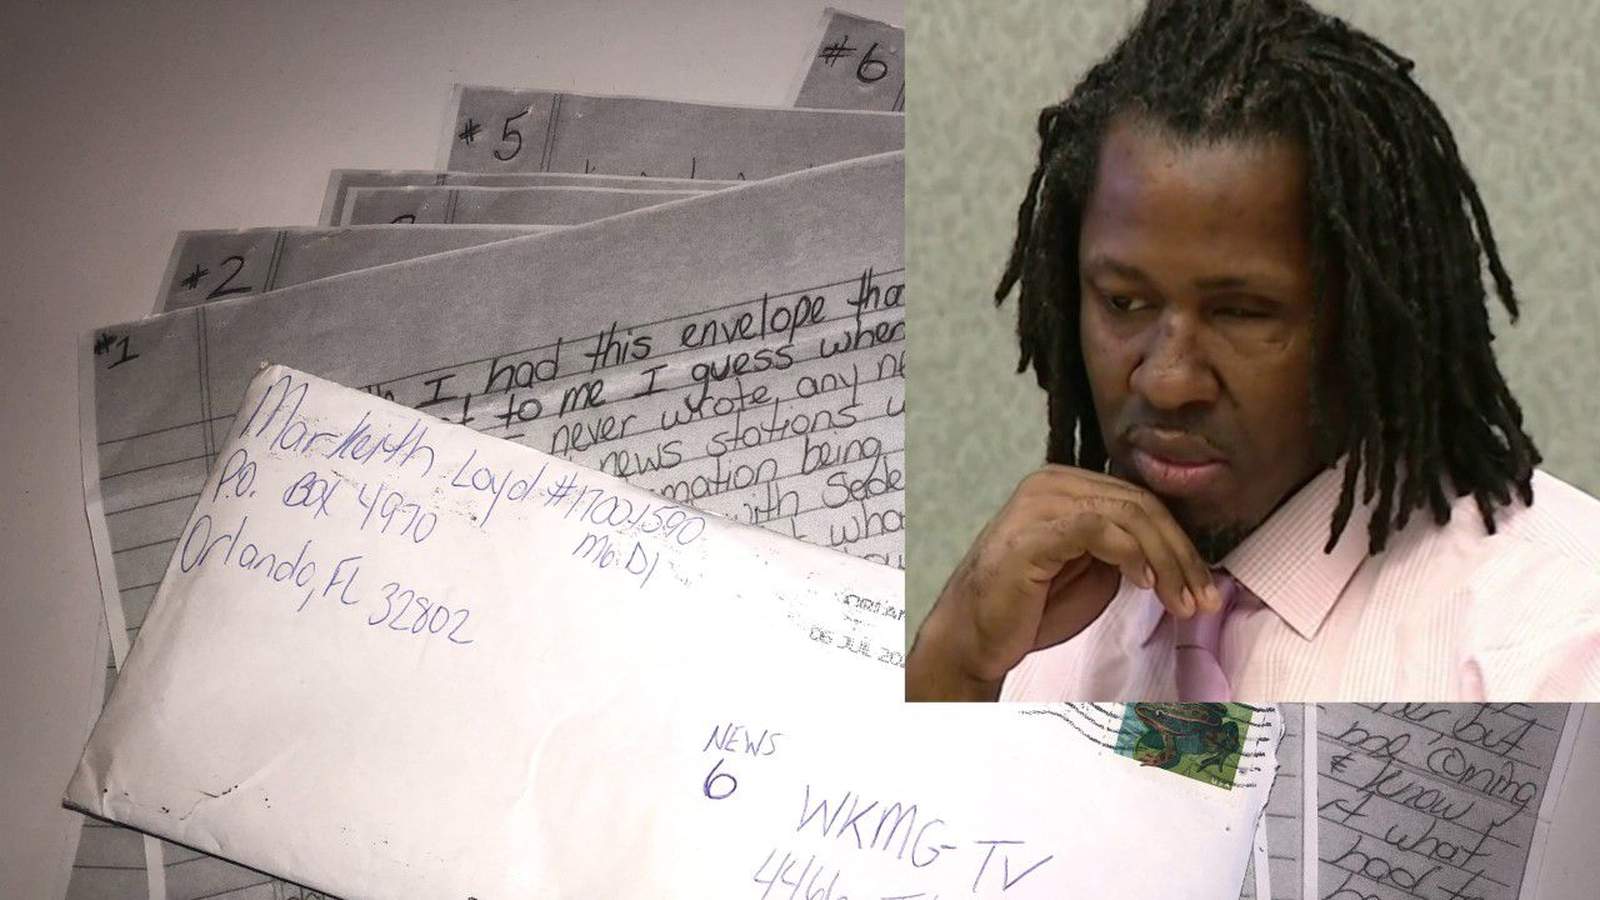 Accused cop killer Markeith Loyd says in letter to News 6 he ‘meets violence with violence’